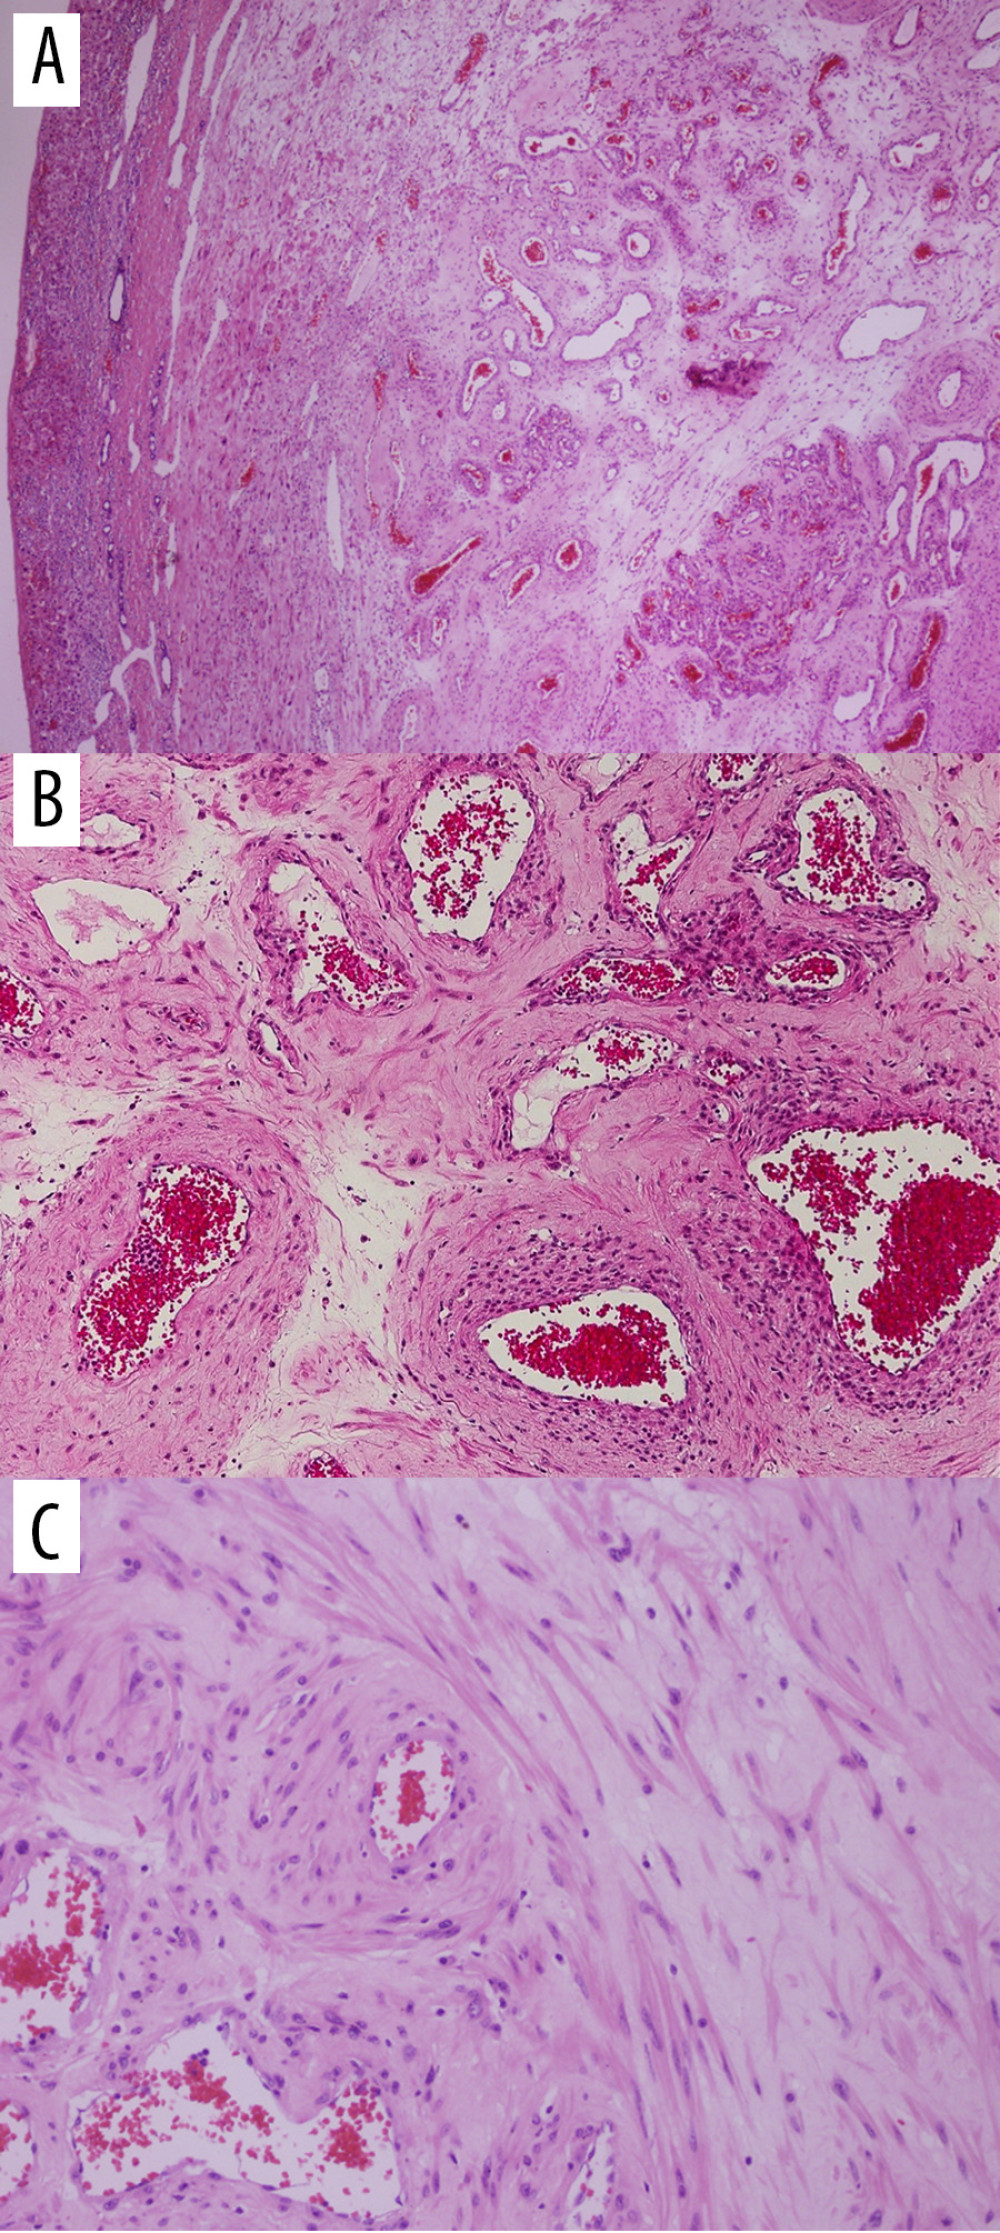 At low magnification, a well-circumscribed tumor in the liver is seen (A, hematoxylin and eosin, 40×). At high magnification, presenting with thick muscle-coated blood vessels (B, hematoxylin and eosin, 200×) with inter- and perivascular smooth muscle bundles (C, hematoxylin and eosin, 200×).